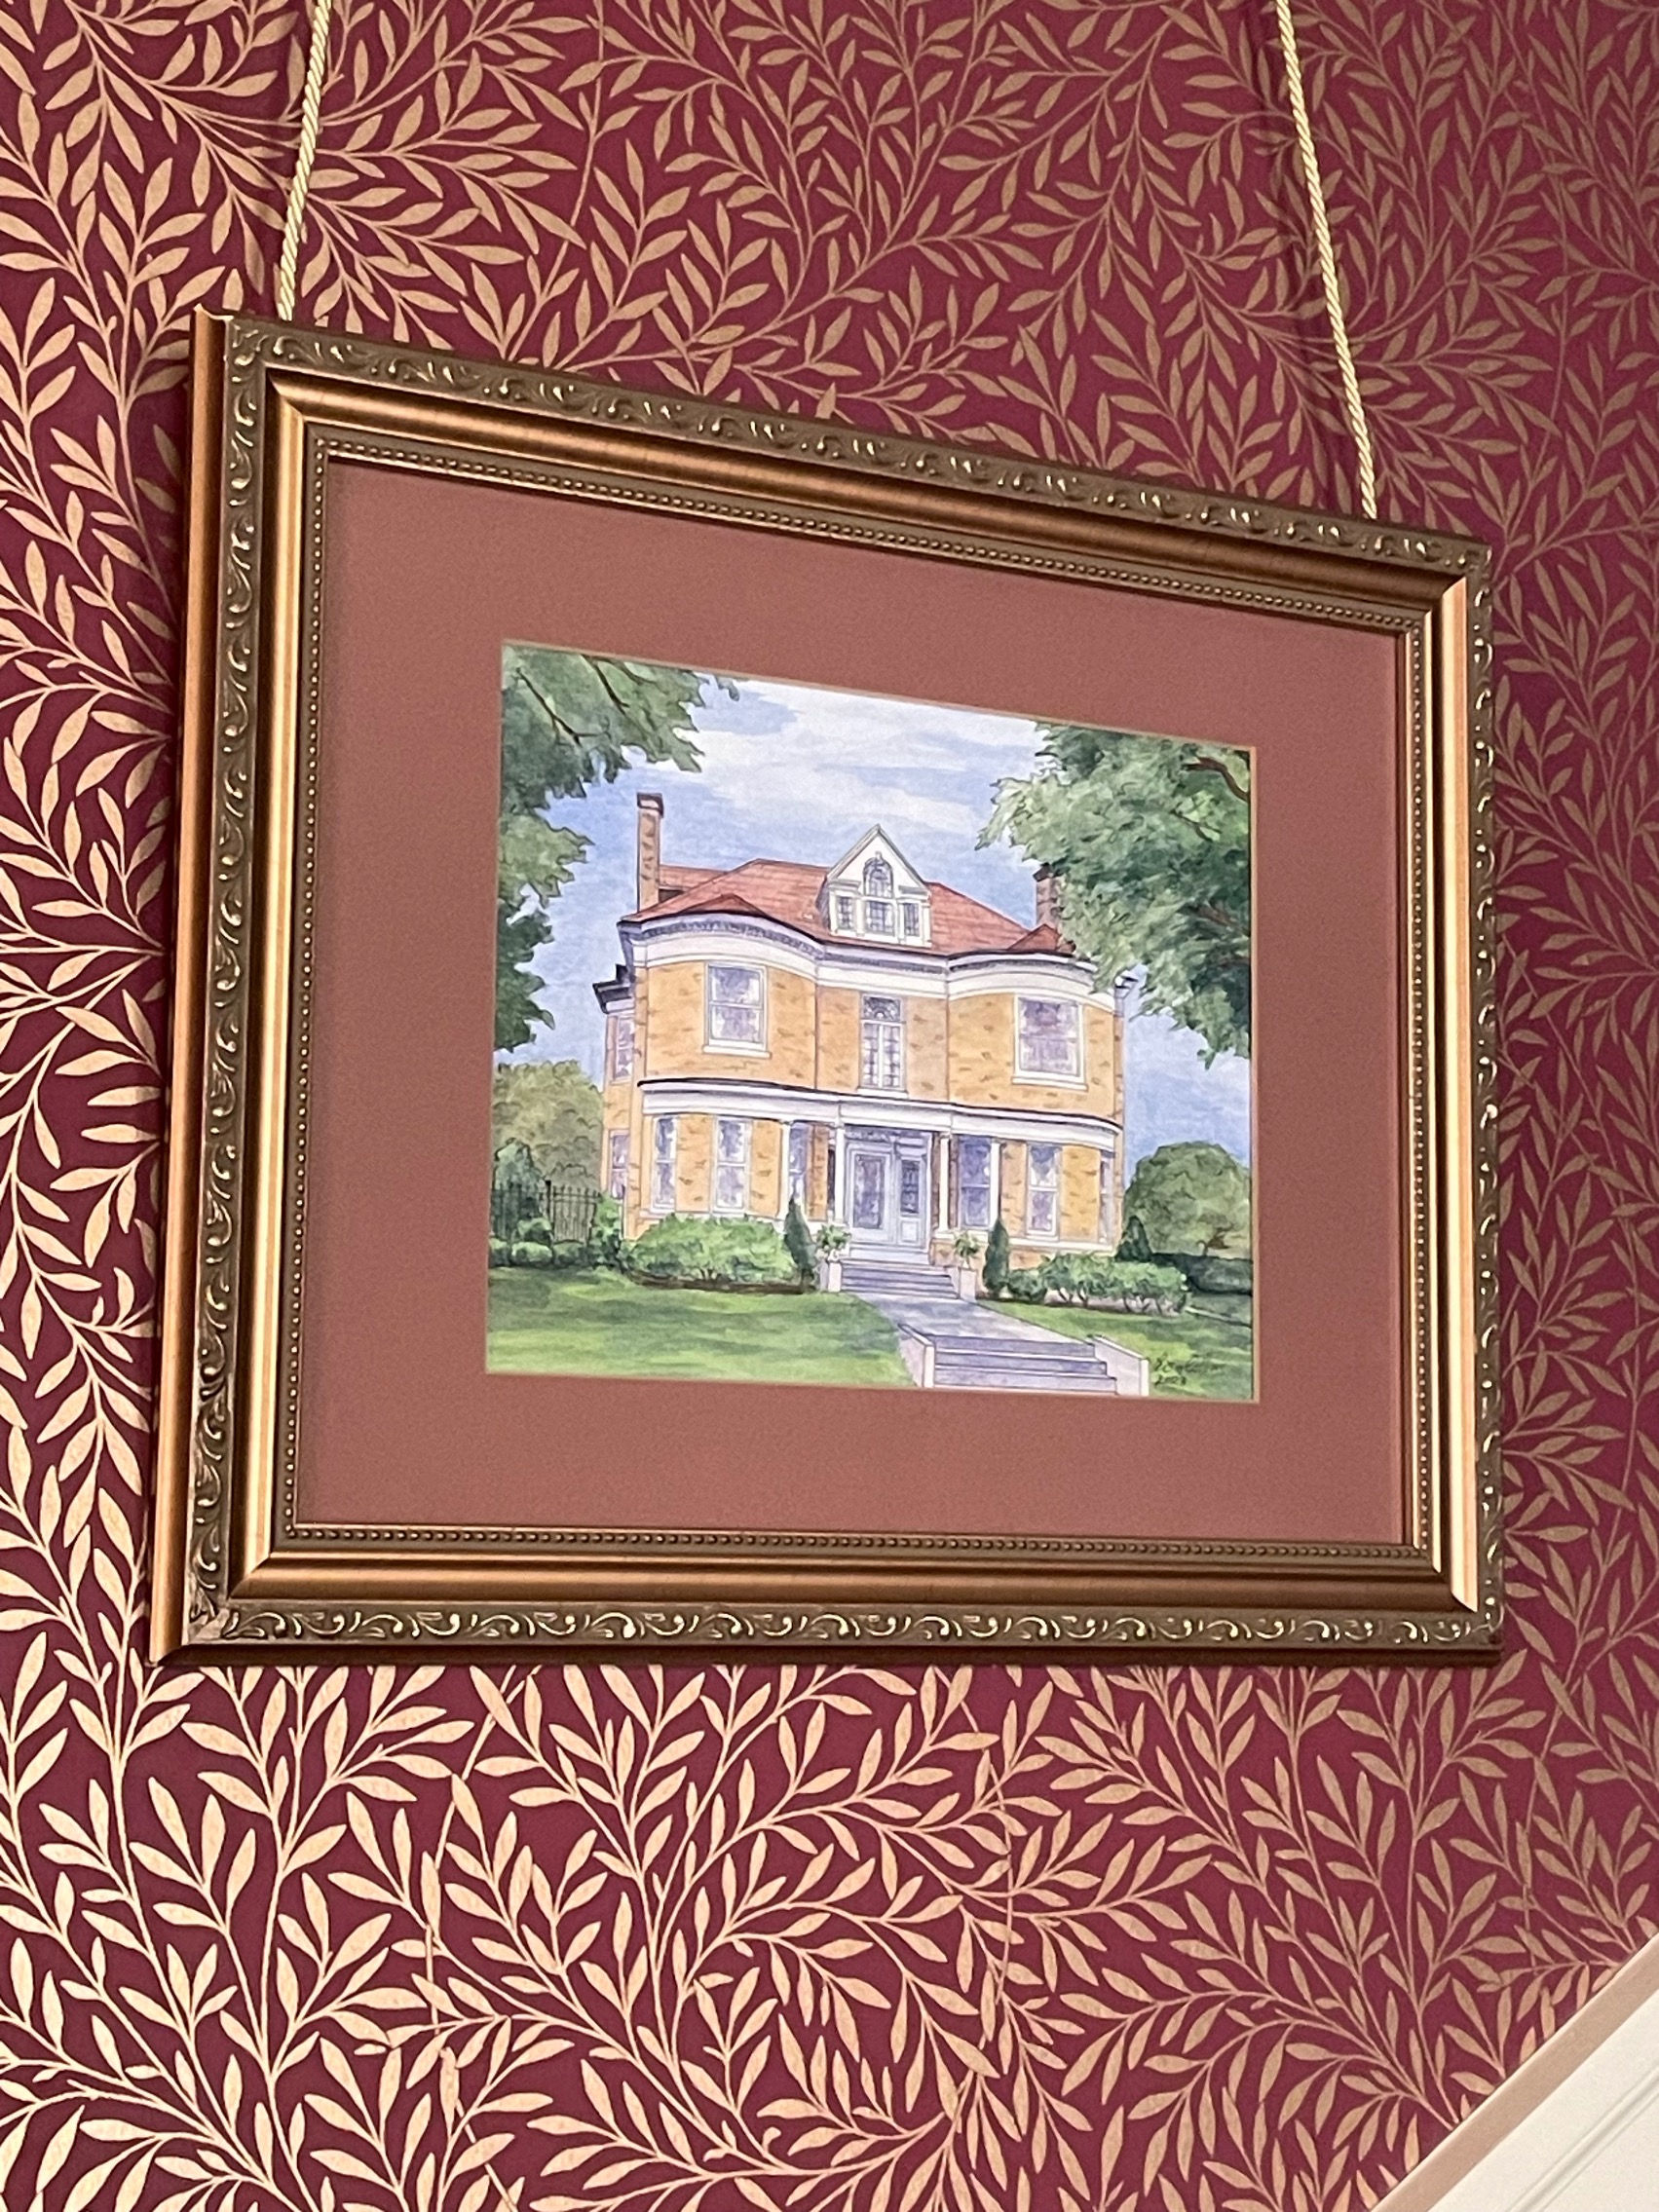 My client Gerry in St. Louis MO added class and elegance with this framing and placement of his house portrait painting.